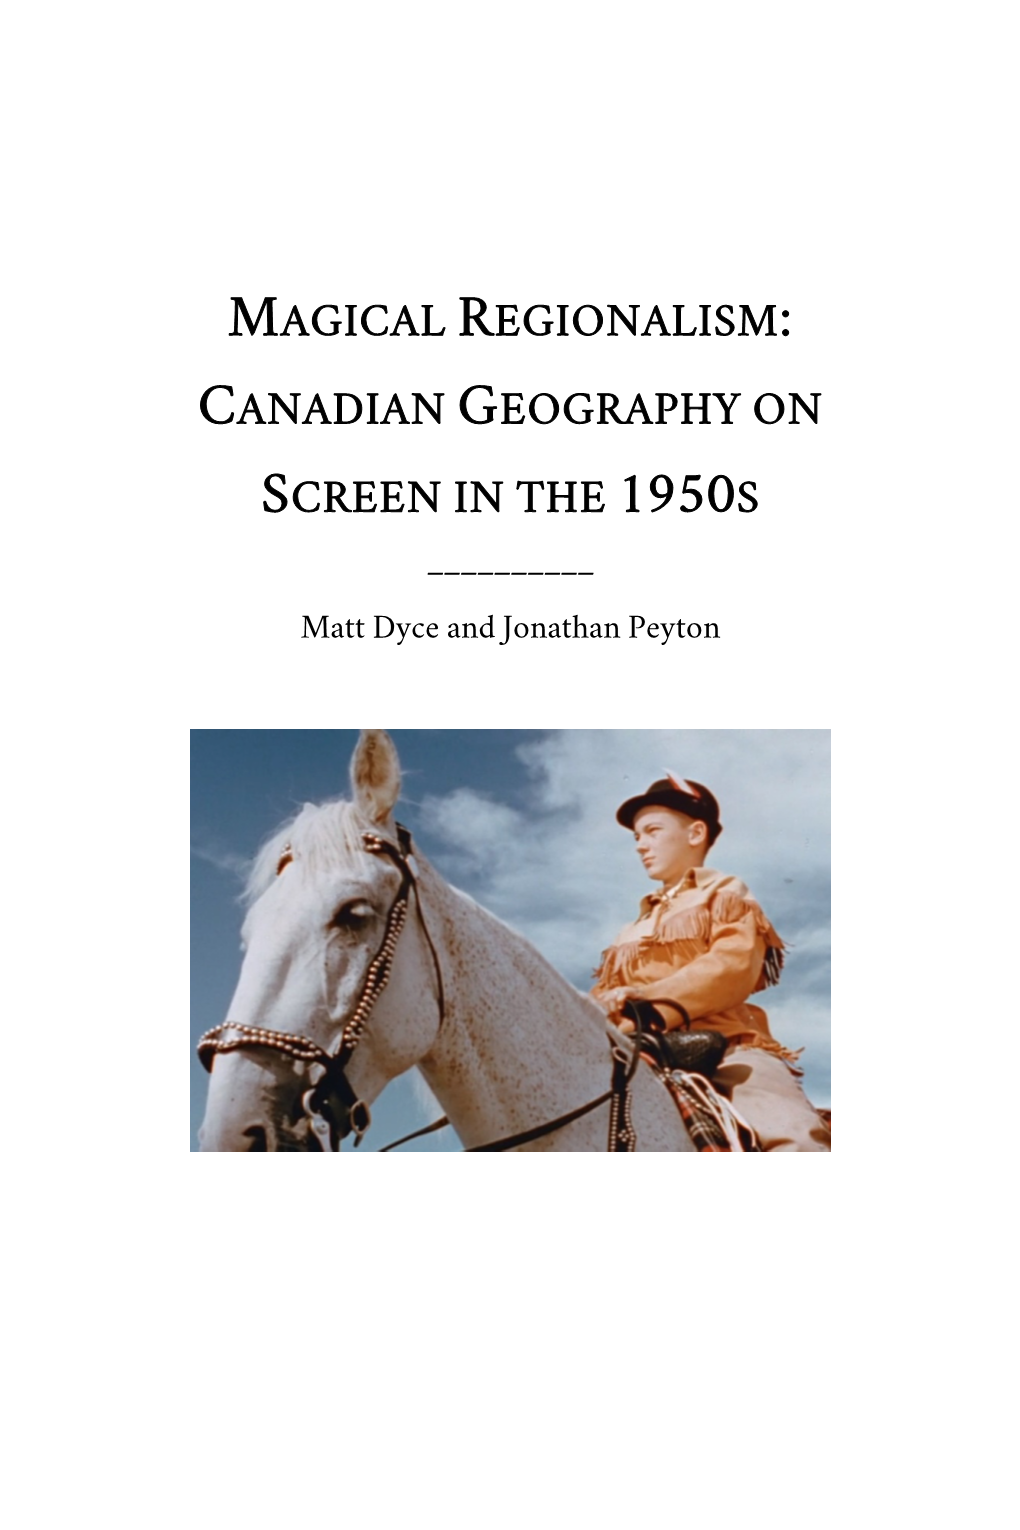 MAGICAL REGIONALISM: CANADIAN GEOGRAPHY on SCREEN in the 1950S ______Matt Dyce and Jonathan Peyton